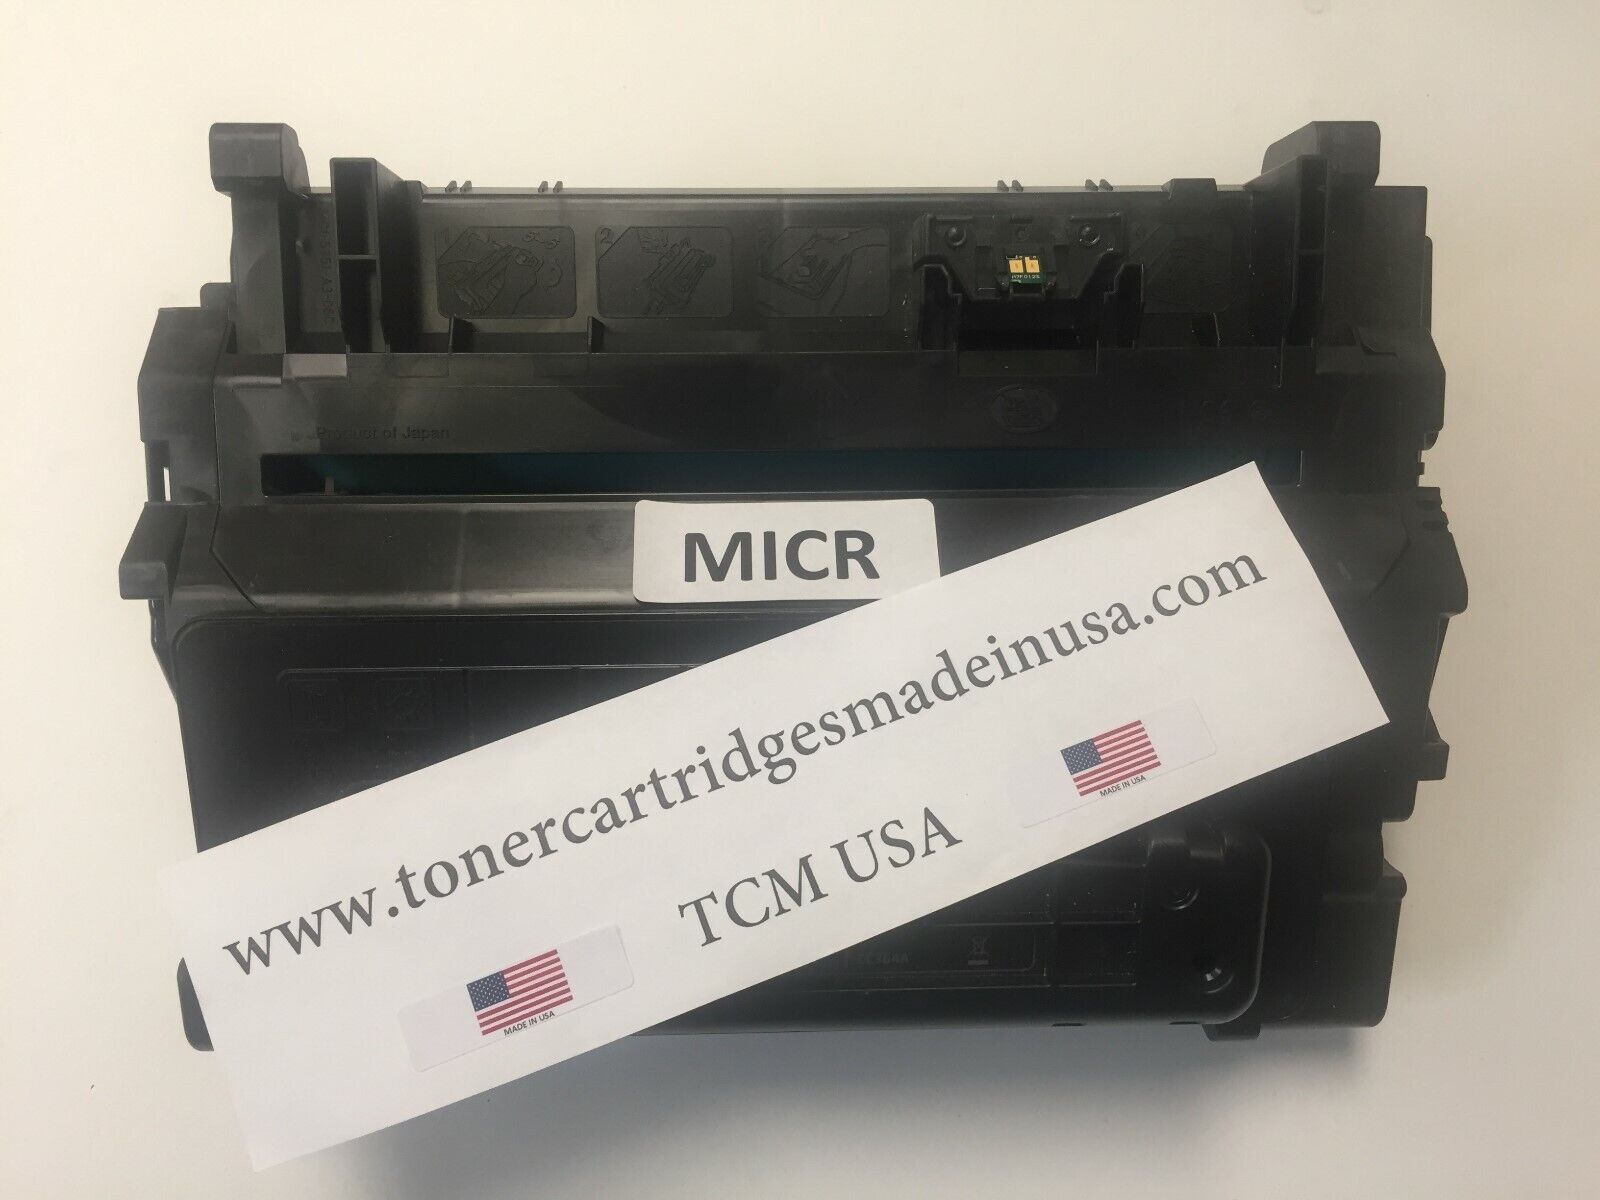 CF281A MICR TCM USA Toner Cartridge. Yield 10.5k Pages. 81A MICR. Made in USA.